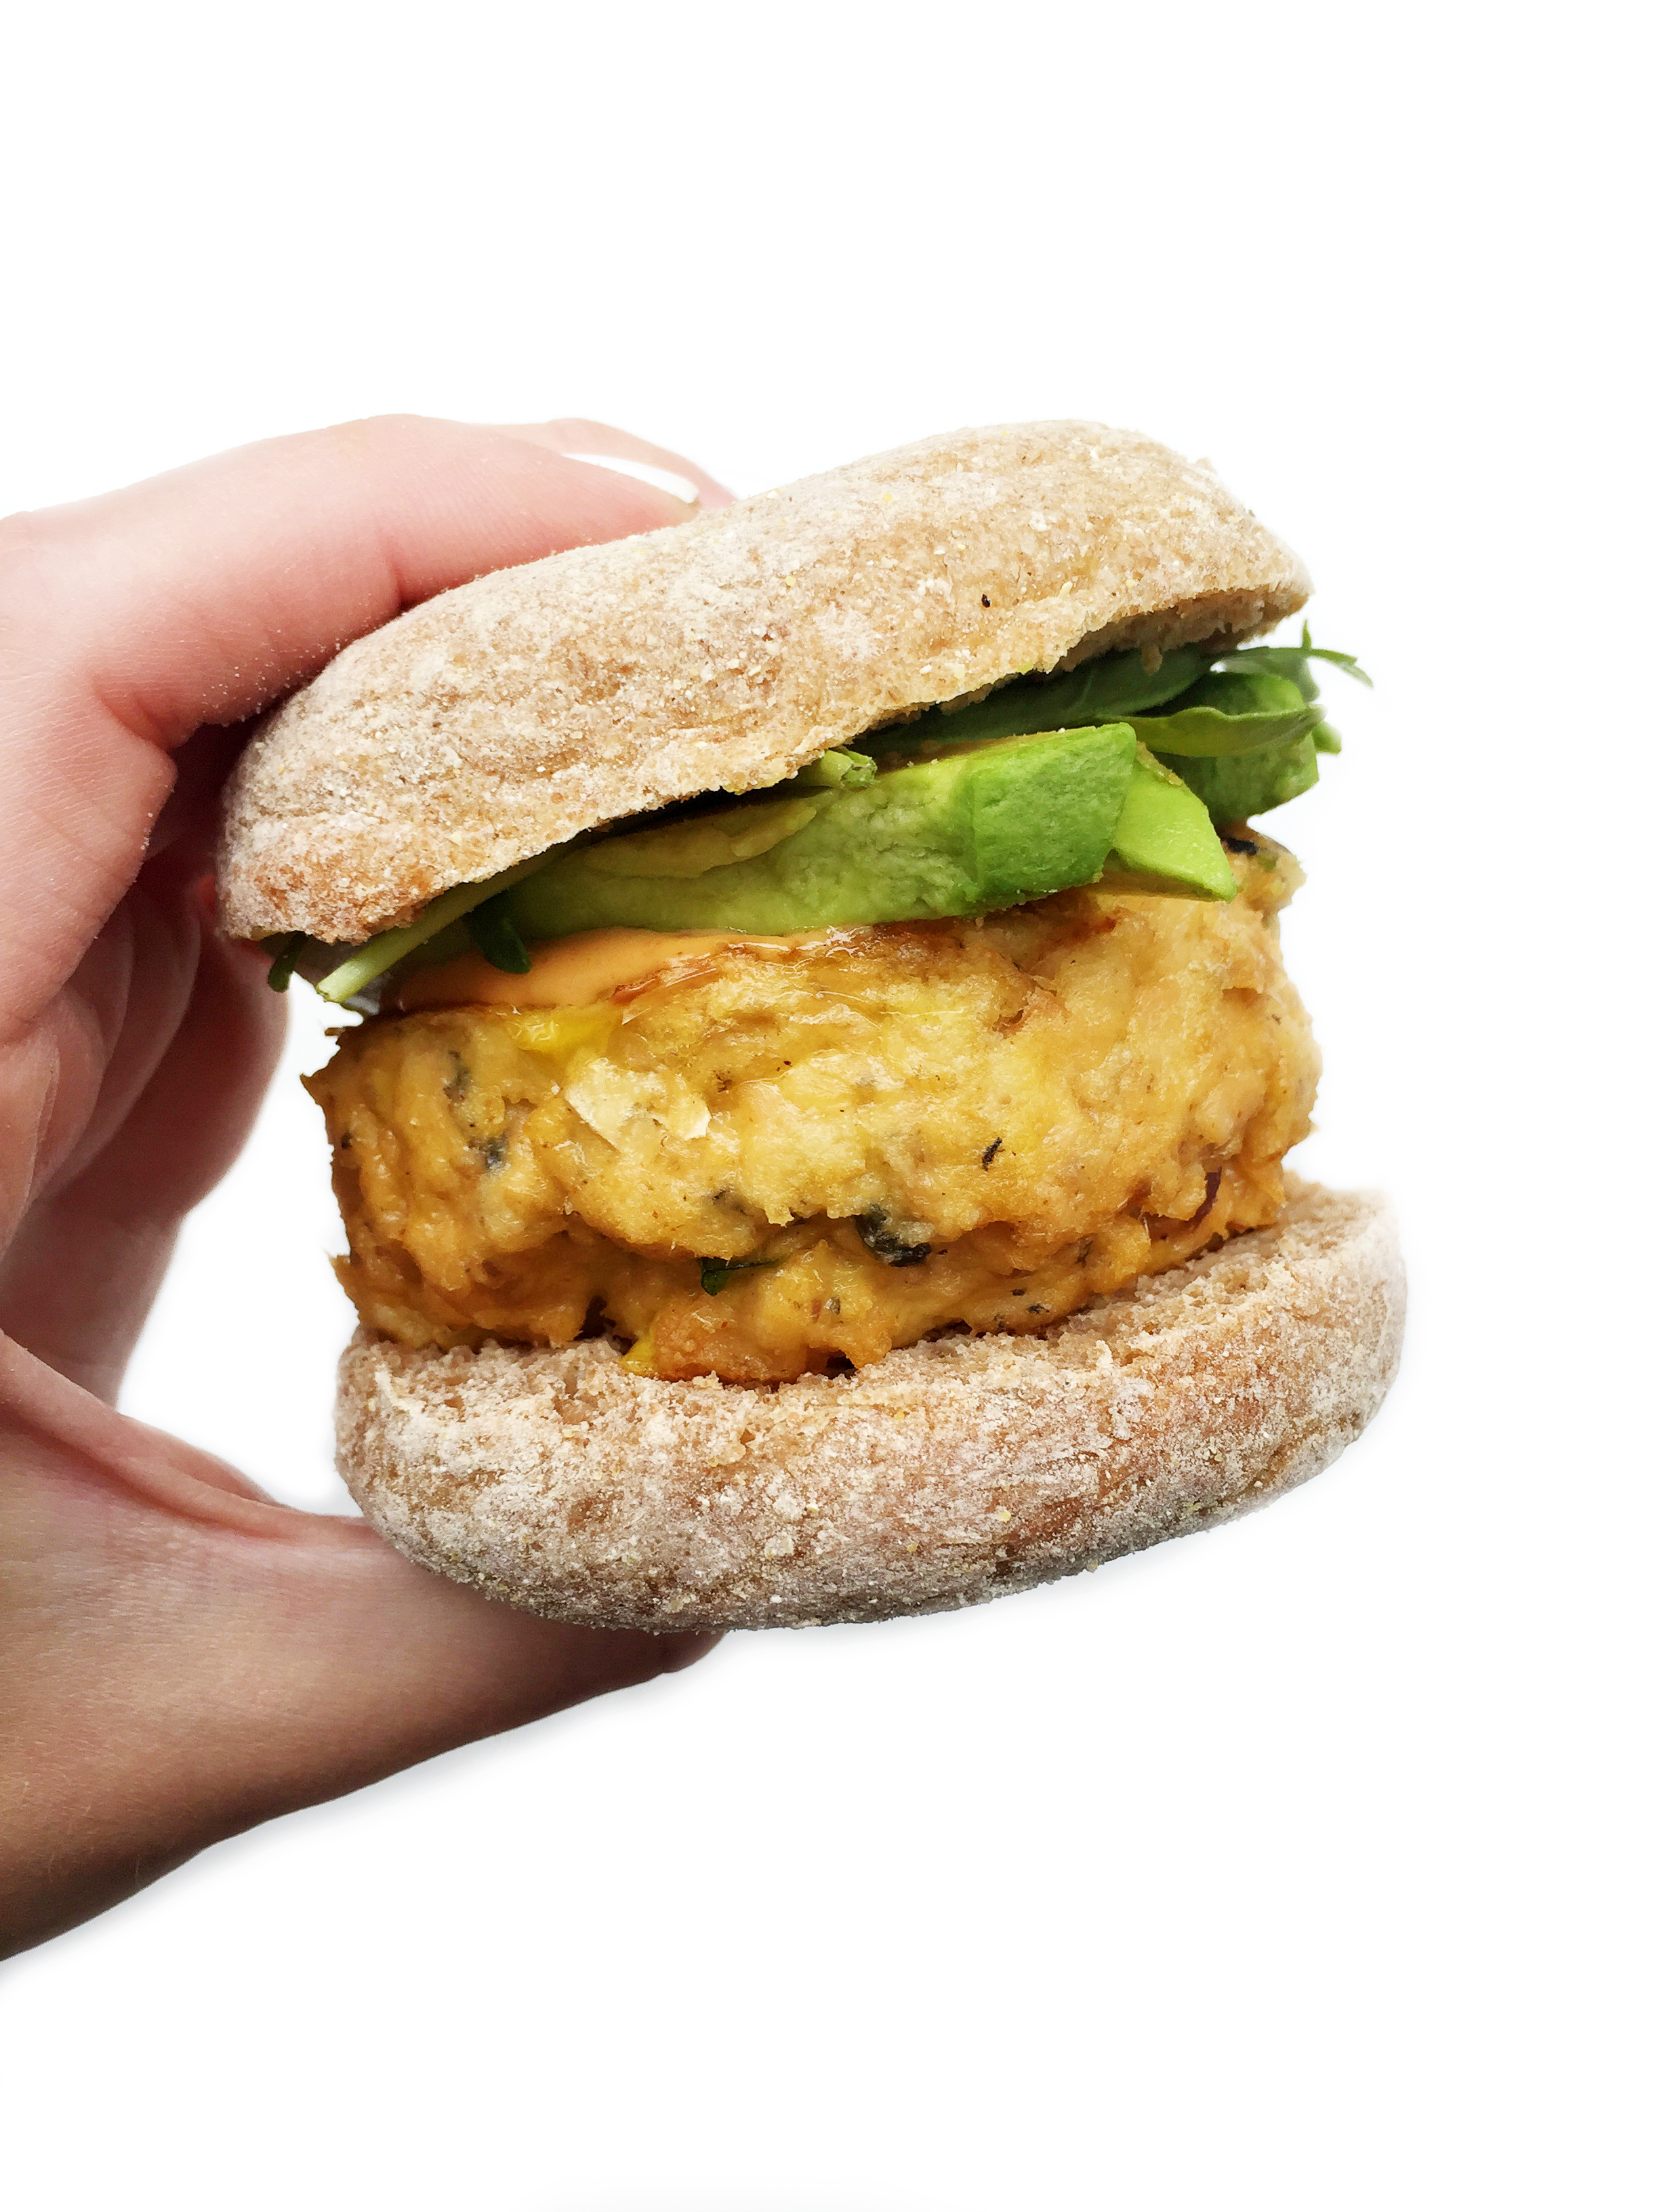 5-ingredient, grain free salmon burgers made with simple ingreidents in less than 30 minutes, no grill necessary!